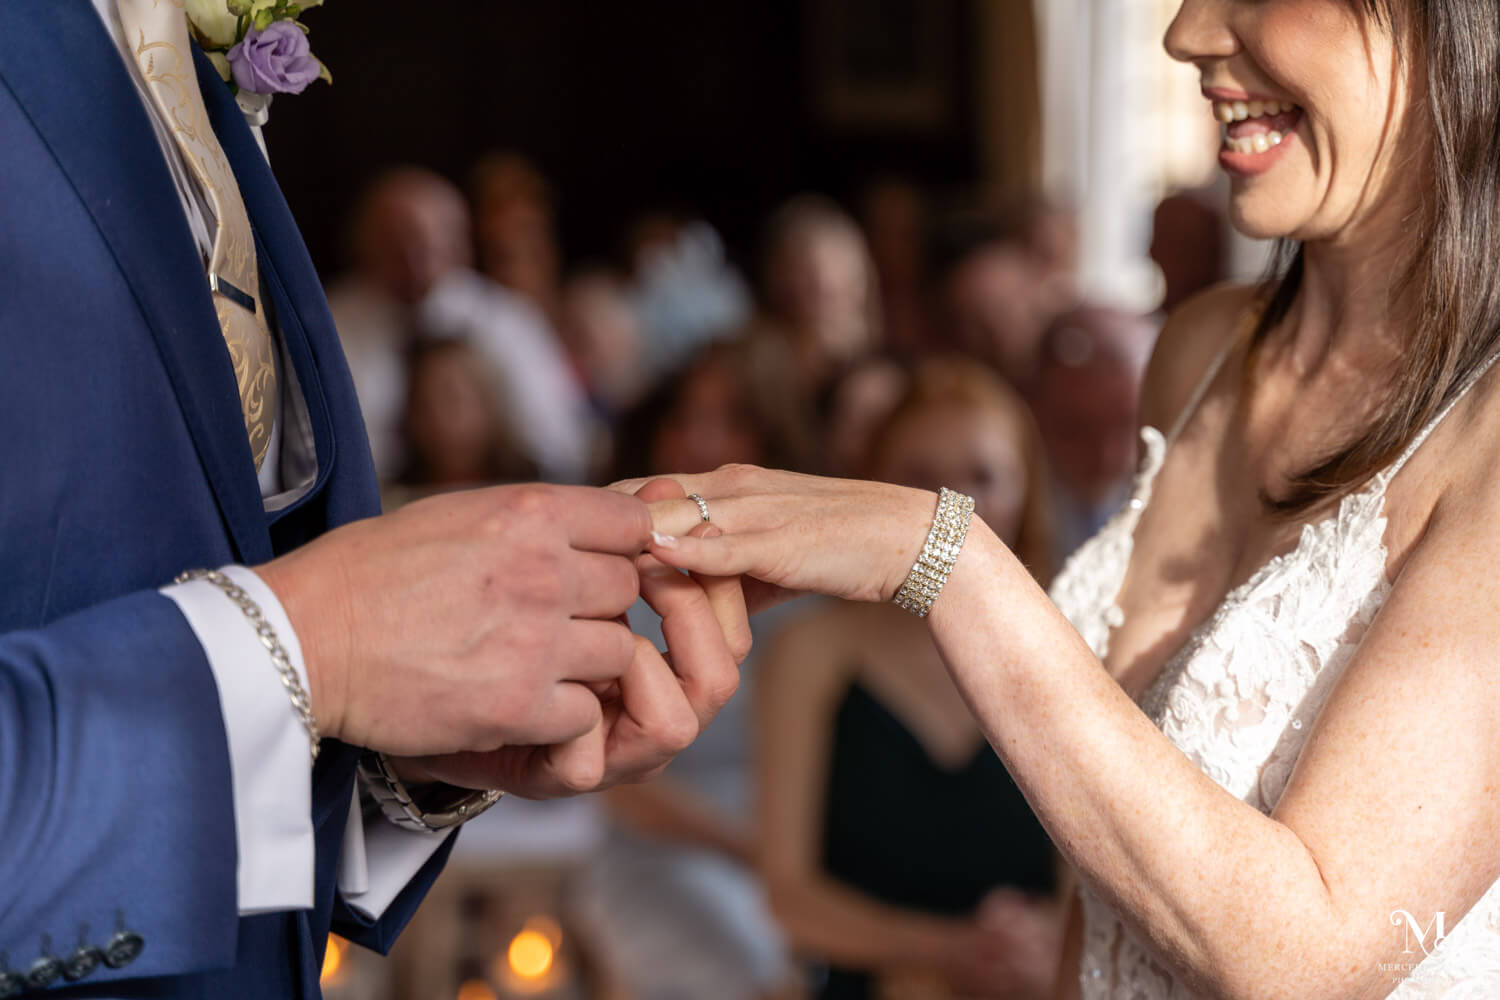 the groom puts the bride's wedding ring on her finger during their wedding ceremony in the Oak room at Cantley House Hotel